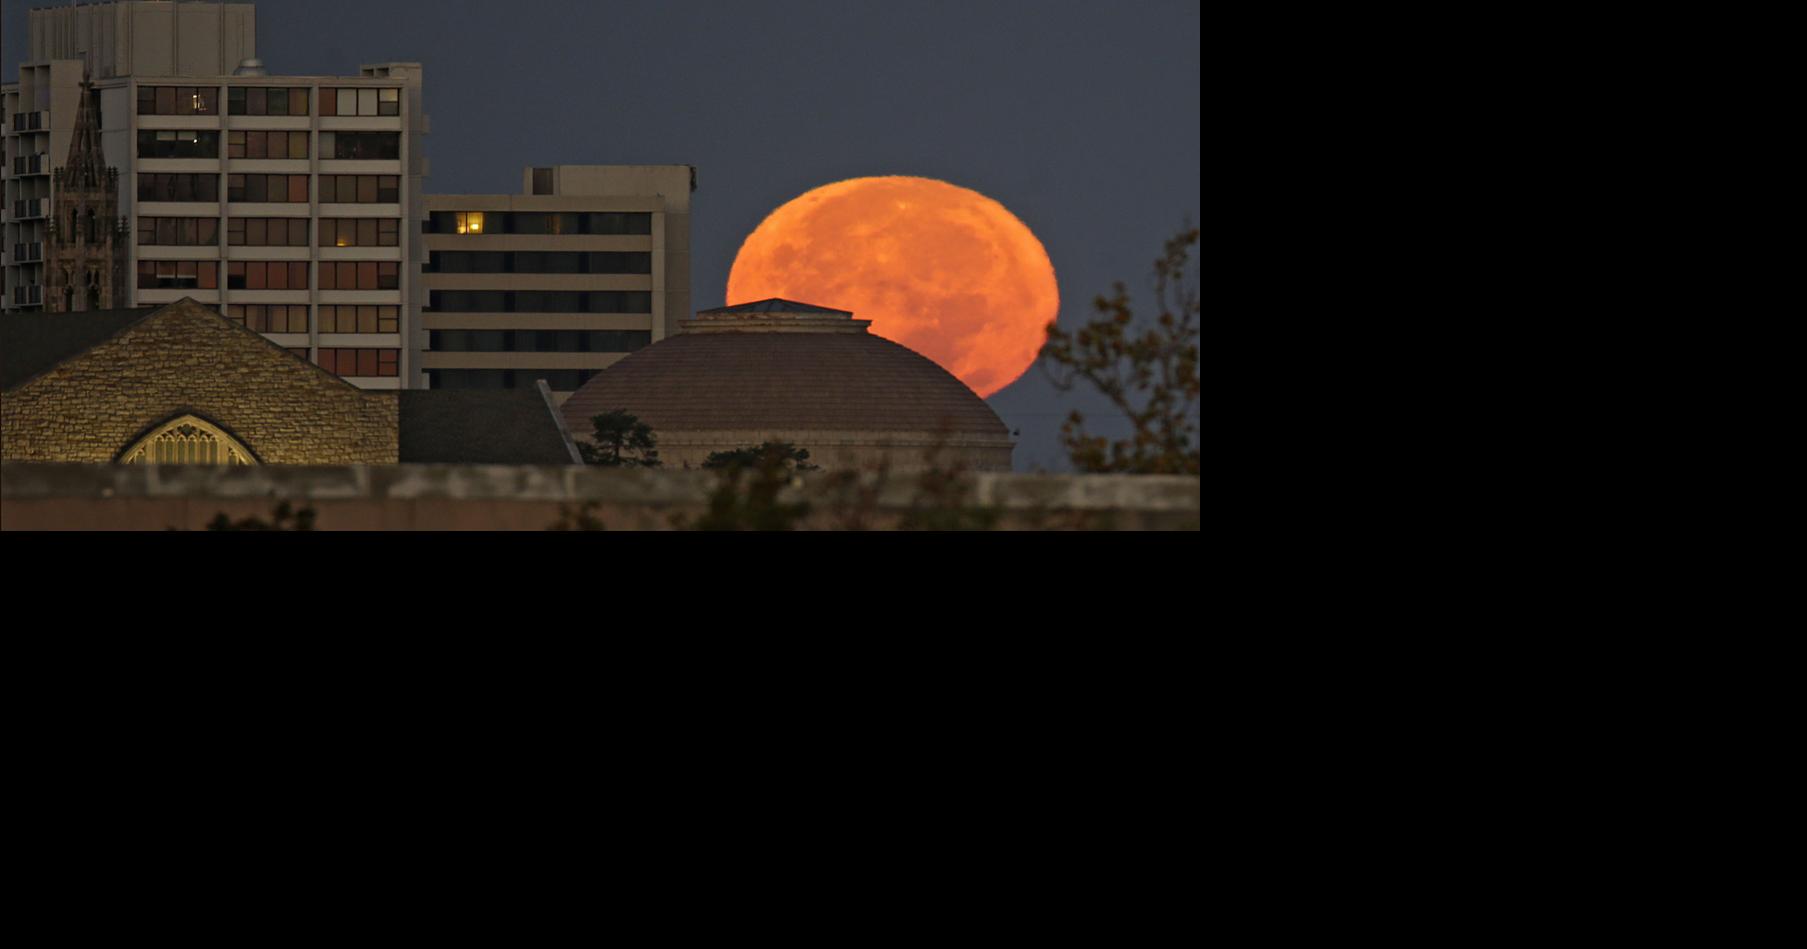 See a lunar eclipse turn the moon a stunning blood red : NPR